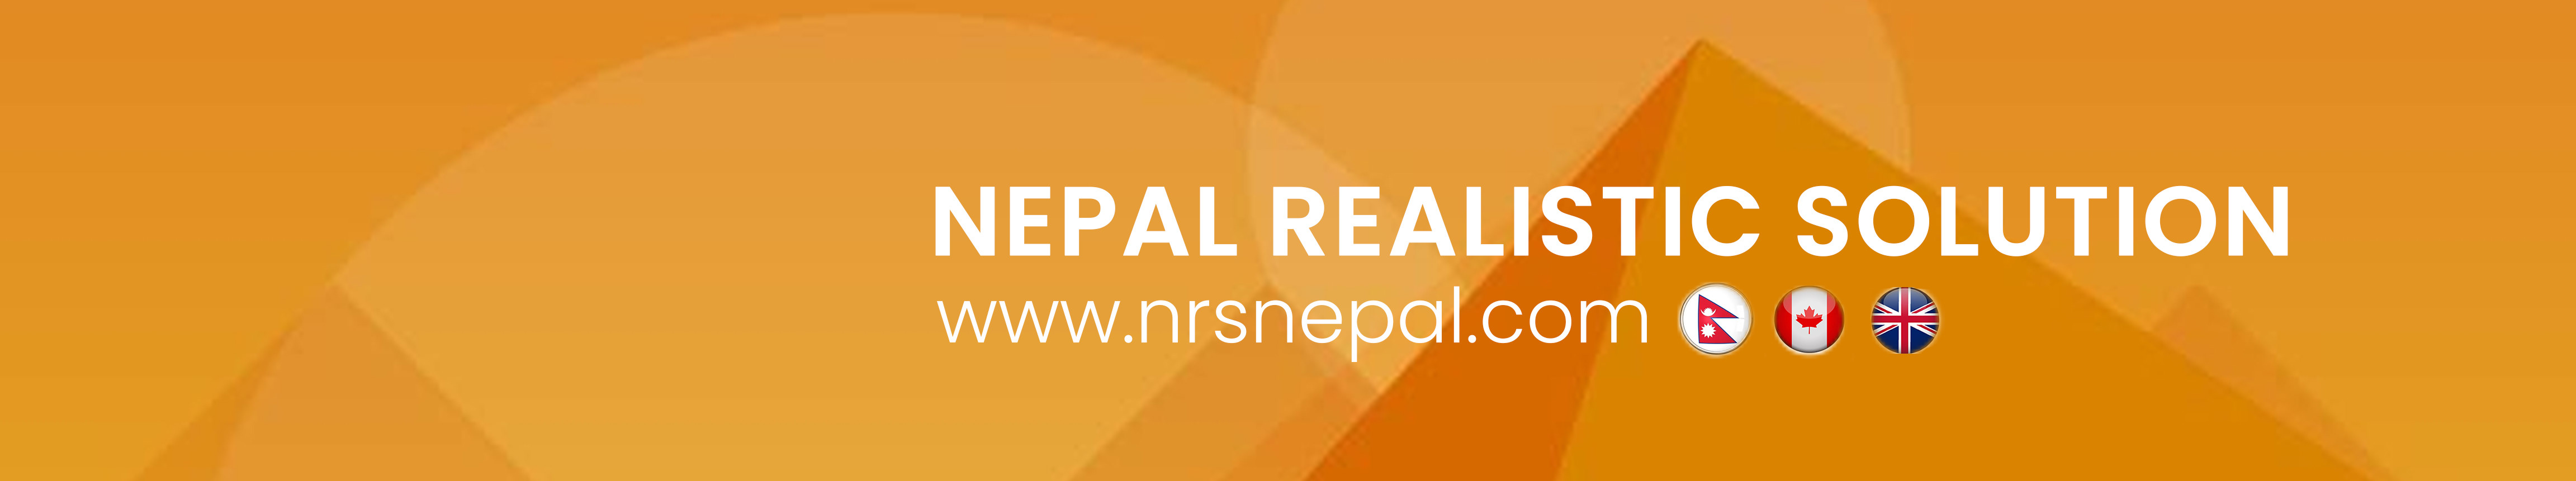 Nepal Realistic Solution's profile banner